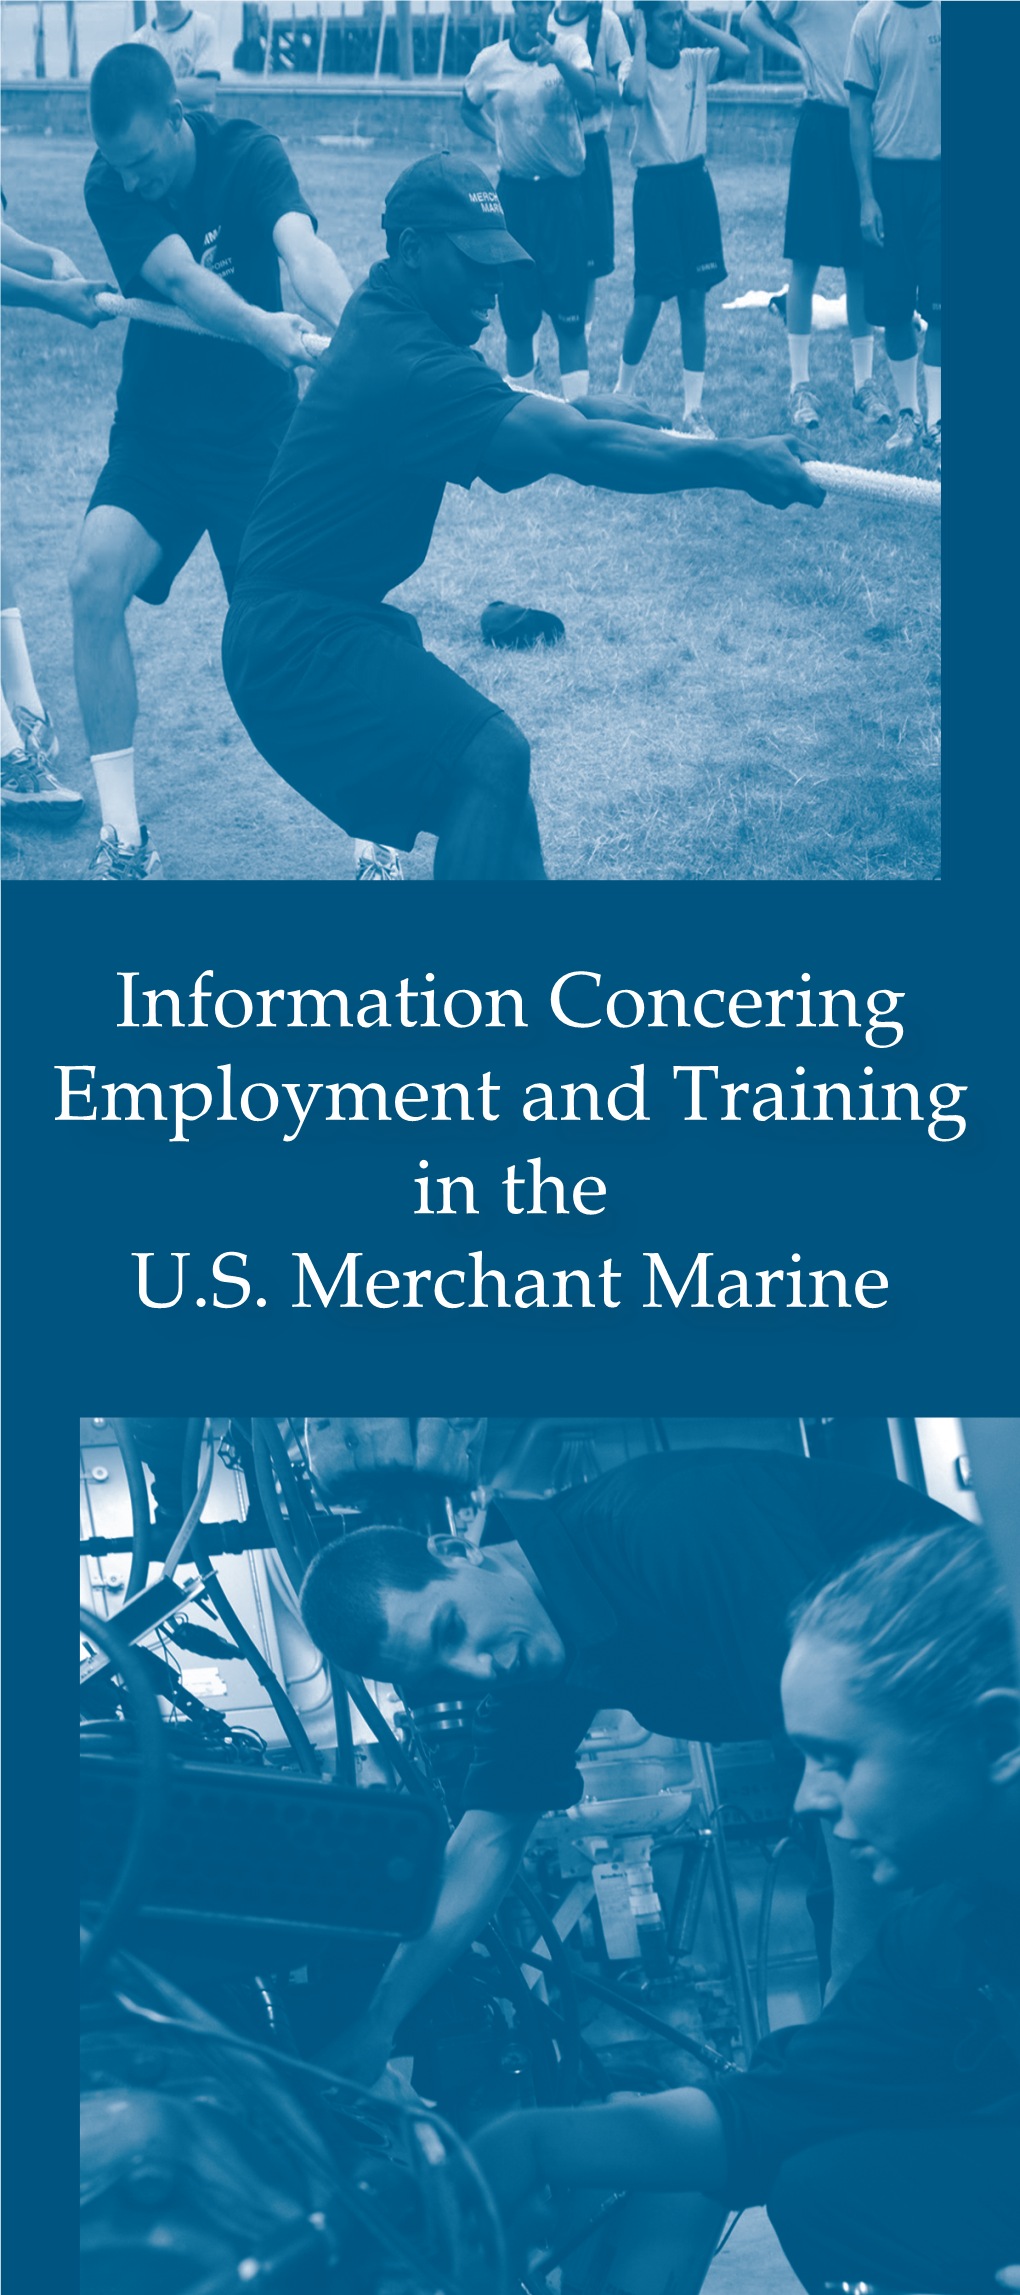 Information Concering Employment and Training in the U.S. Merchant Marine